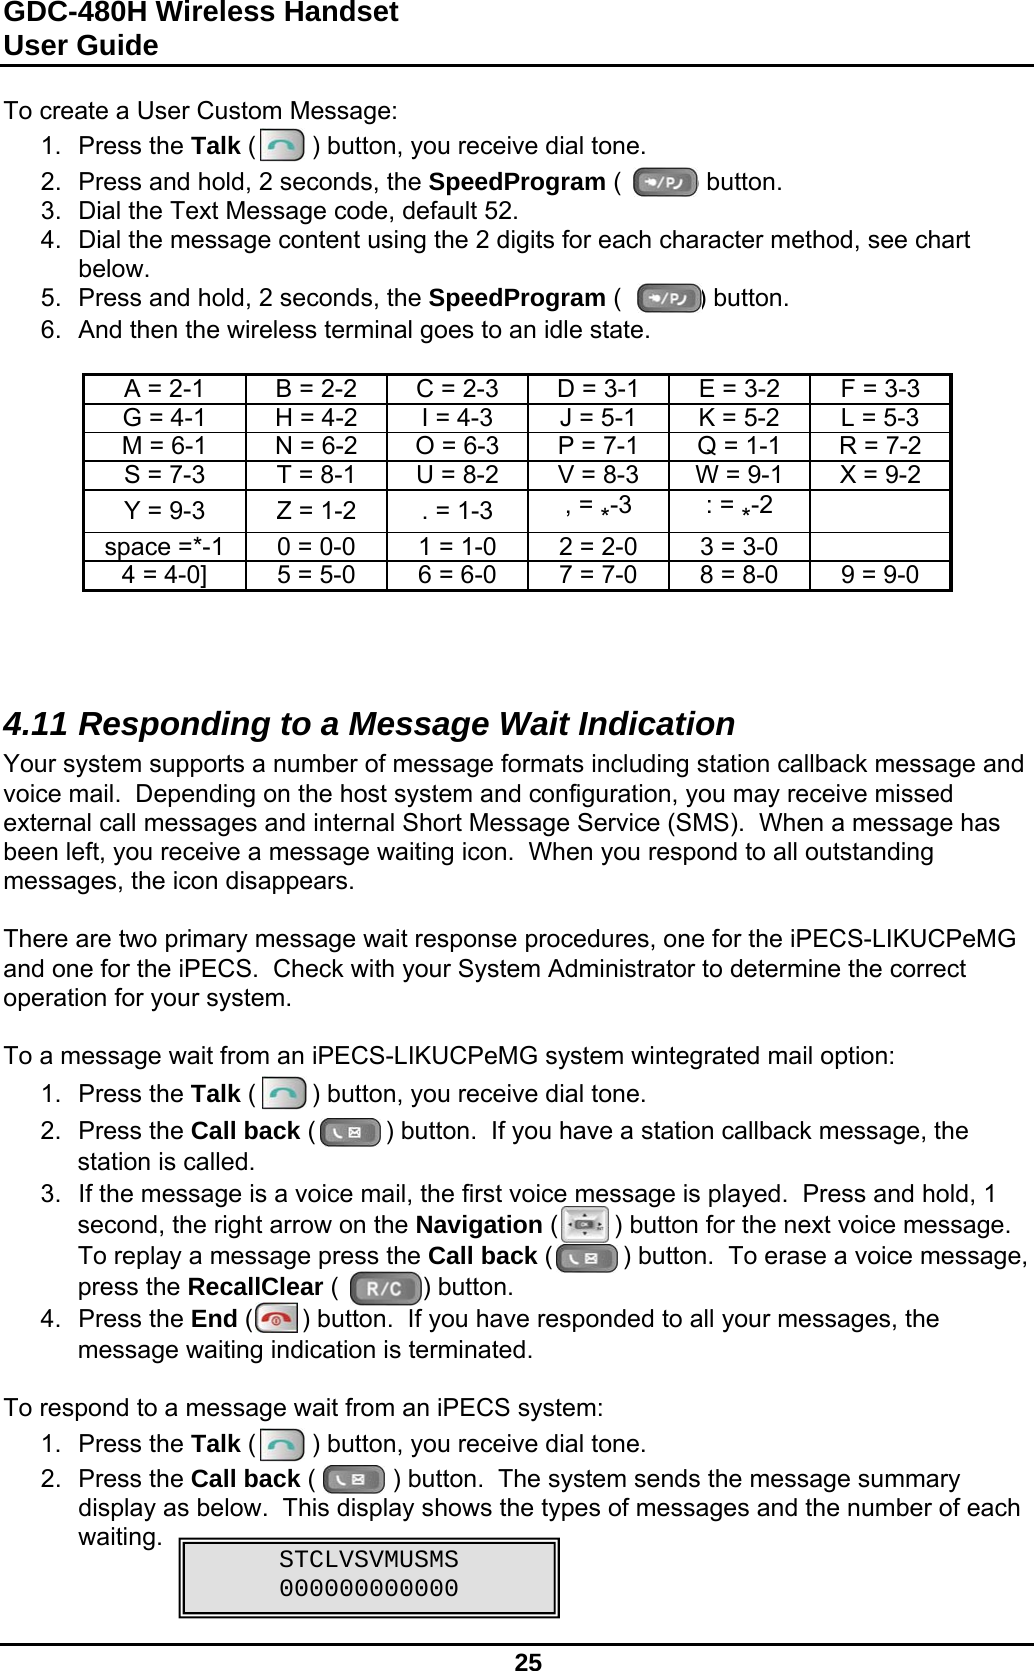 GDC-480H Wireless Handset User Guide   25  To create a User Custom Message: 1. Press the Talk (        ) button, you receive dial tone. 2.  Press and hold, 2 seconds, the SpeedProgram (          ) button. 3.  Dial the Text Message code, default 52. 4.  Dial the message content using the 2 digits for each character method, see chart below. 5.  Press and hold, 2 seconds, the SpeedProgram (           ) button. 6.  And then the wireless terminal goes to an idle state.  A = 2-1  B = 2-2  C = 2-3 D = 3-1 E = 3-2  F = 3-3 G = 4-1  H = 4-2  I = 4-3 J = 5-1 K = 5-2  L = 5-3 M = 6-1  N = 6-2  O = 6-3 P = 7-1 Q = 1-1  R = 7-2S = 7-3  T = 8-1  U = 8-2 V = 8-3 W = 9-1  X = 9-2 Y = 9-3  Z = 1-2  . = 1-3  , = *-3 : = *-2   space =*-1  0 = 0-0  1 = 1-0 2 = 2-0 3 = 3-0   4 = 4-0]  5 = 5-0  6 = 6-0 7 = 7-0 8 = 8-0  9 = 9-0    4.11 Responding to a Message Wait Indication Your system supports a number of message formats including station callback message and voice mail.  Depending on the host system and configuration, you may receive missed external call messages and internal Short Message Service (SMS).  When a message has been left, you receive a message waiting icon.  When you respond to all outstanding messages, the icon disappears.  There are two primary message wait response procedures, one for the iPECS-LIKUCPeMG and one for the iPECS.  Check with your System Administrator to determine the correct operation for your system.  To a message wait from an iPECS-LIKUCPeMG system wintegrated mail option: 1. Press the Talk (        ) button, you receive dial tone. 2. Press the Call back (          ) button.  If you have a station callback message, the station is called. 3.  If the message is a voice mail, the first voice message is played.  Press and hold, 1 second, the right arrow on the Navigation (        ) button for the next voice message.  To replay a message press the Call back (          ) button.  To erase a voice message, press the RecallClear (            ) button. 4. Press the End (       ) button.  If you have responded to all your messages, the message waiting indication is terminated.  To respond to a message wait from an iPECS system: 1. Press the Talk (        ) button, you receive dial tone. 2. Press the Call back (           ) button.  The system sends the message summary display as below.  This display shows the types of messages and the number of each waiting.   STCLVSVMUSMS 000000000000 